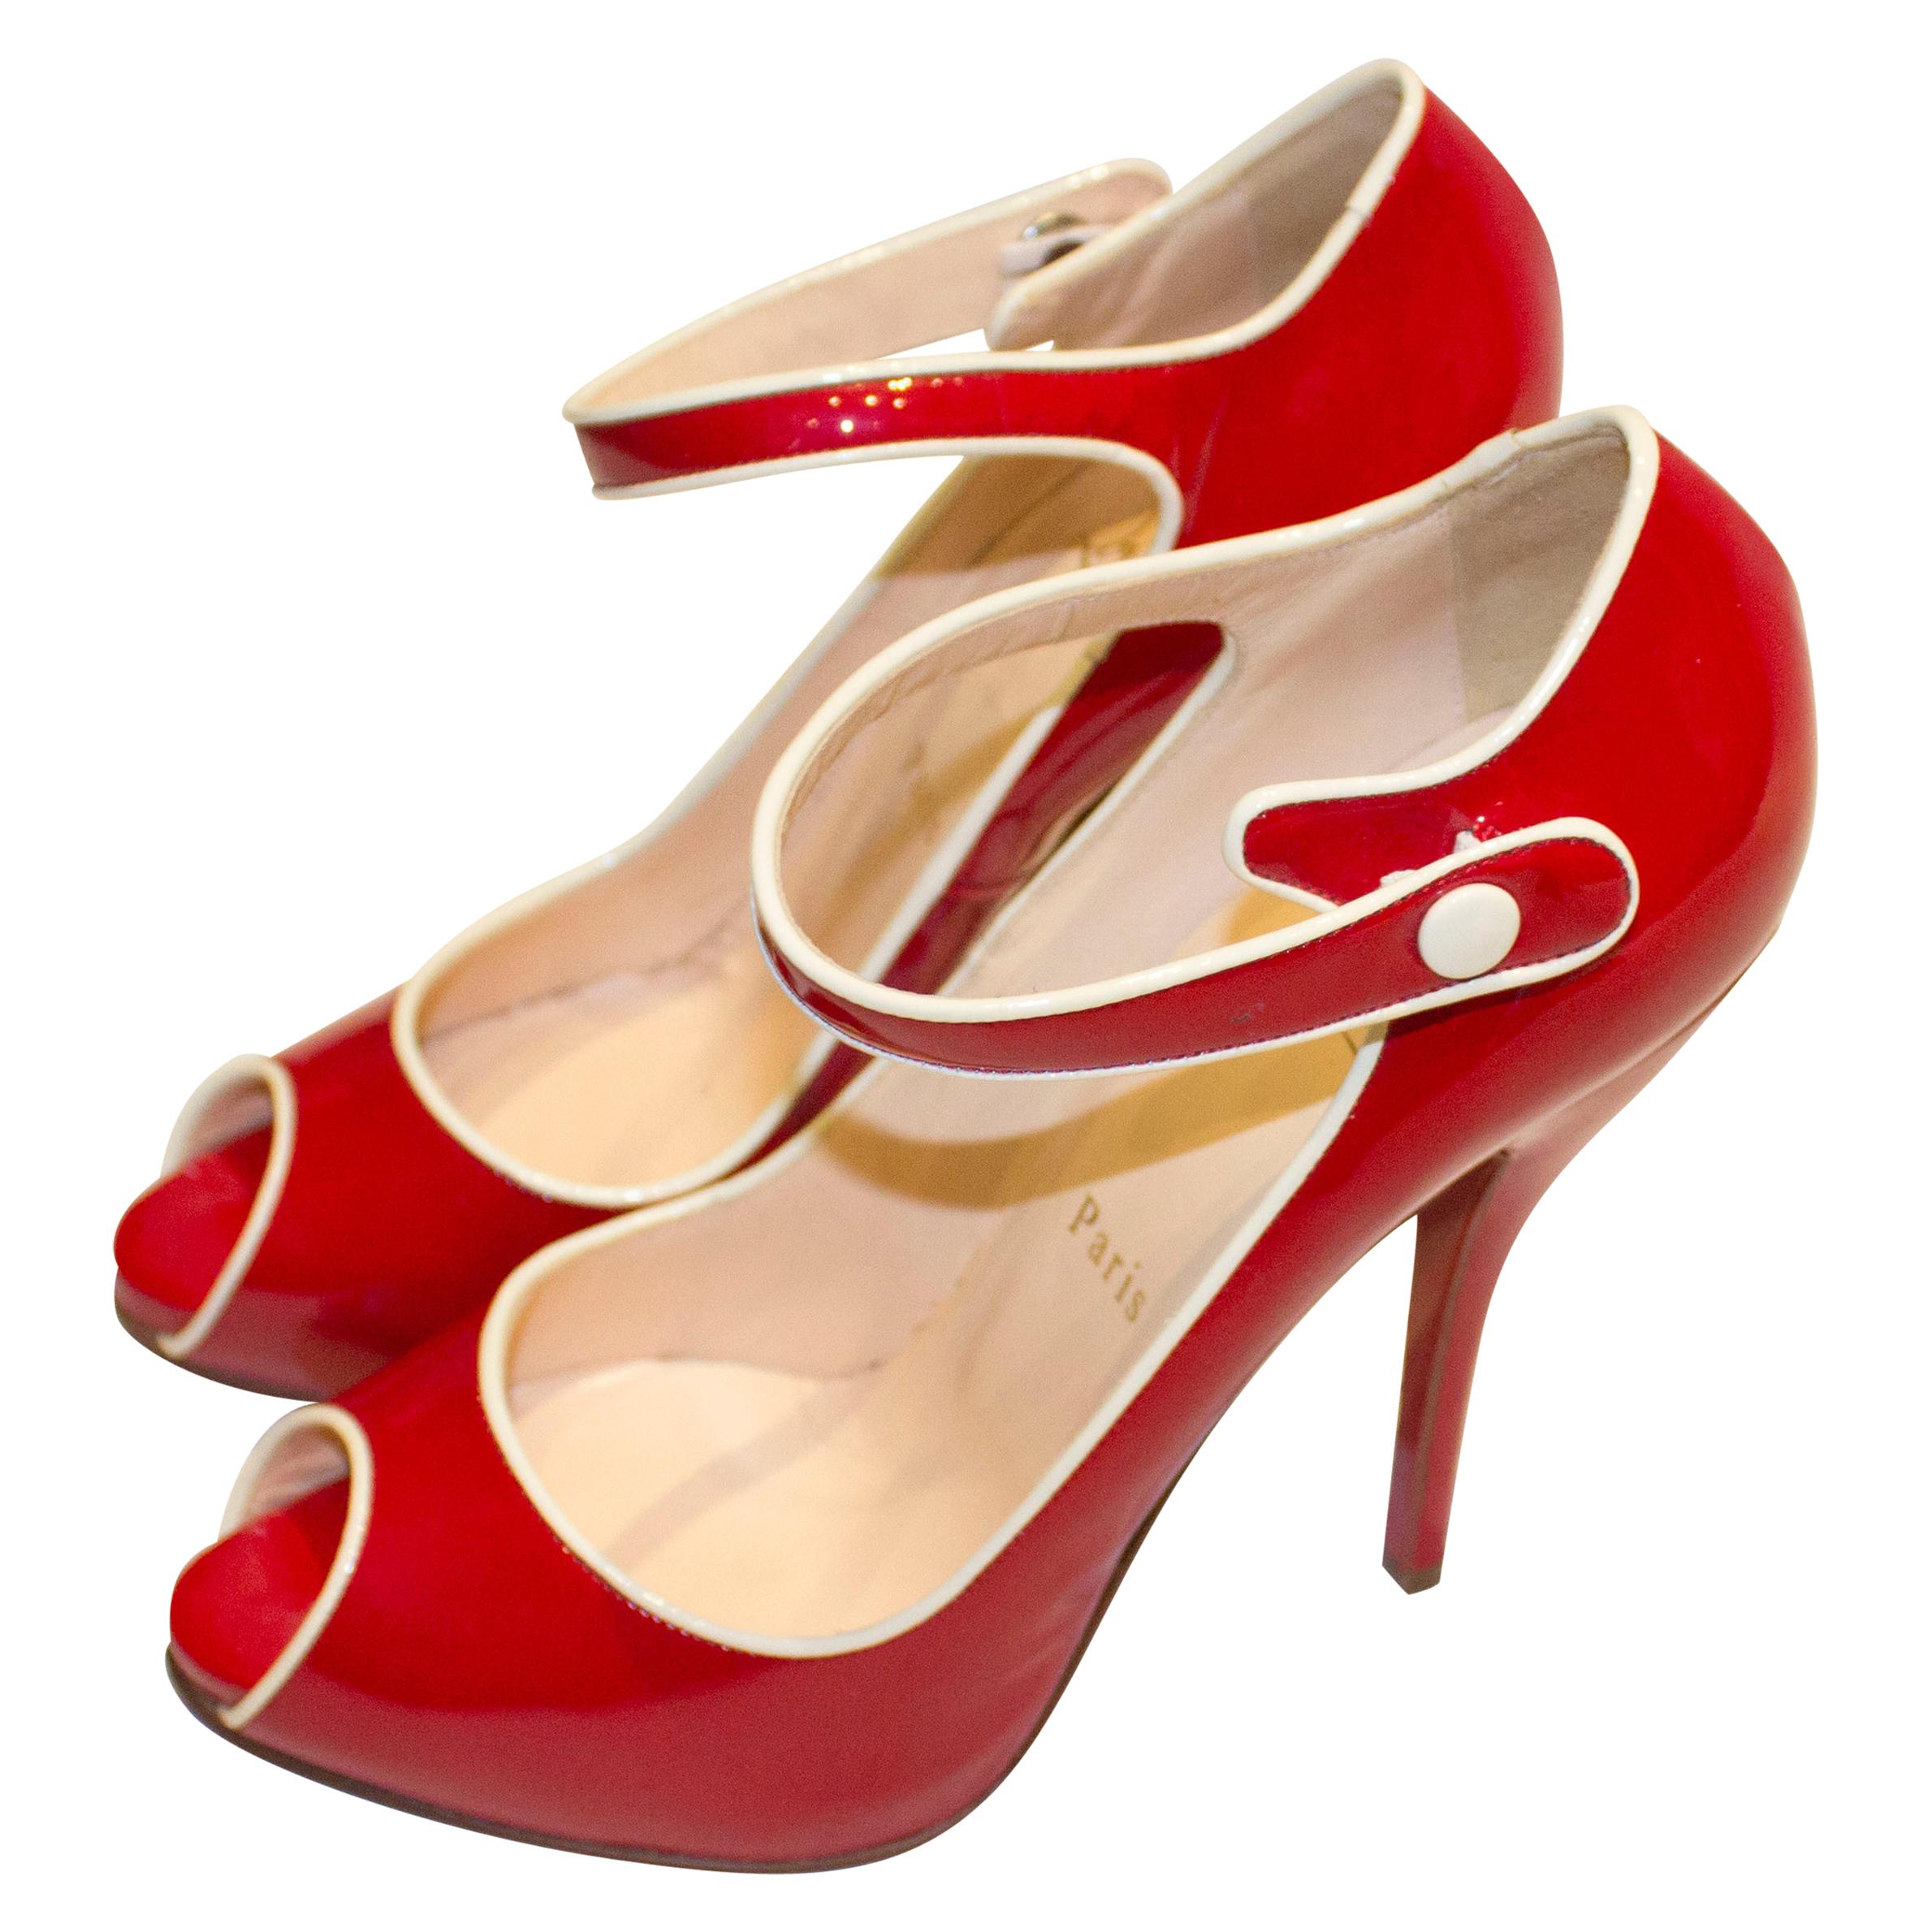 Christian Louboutin Red Patent Peep Toe Shoes with Ankle Straps